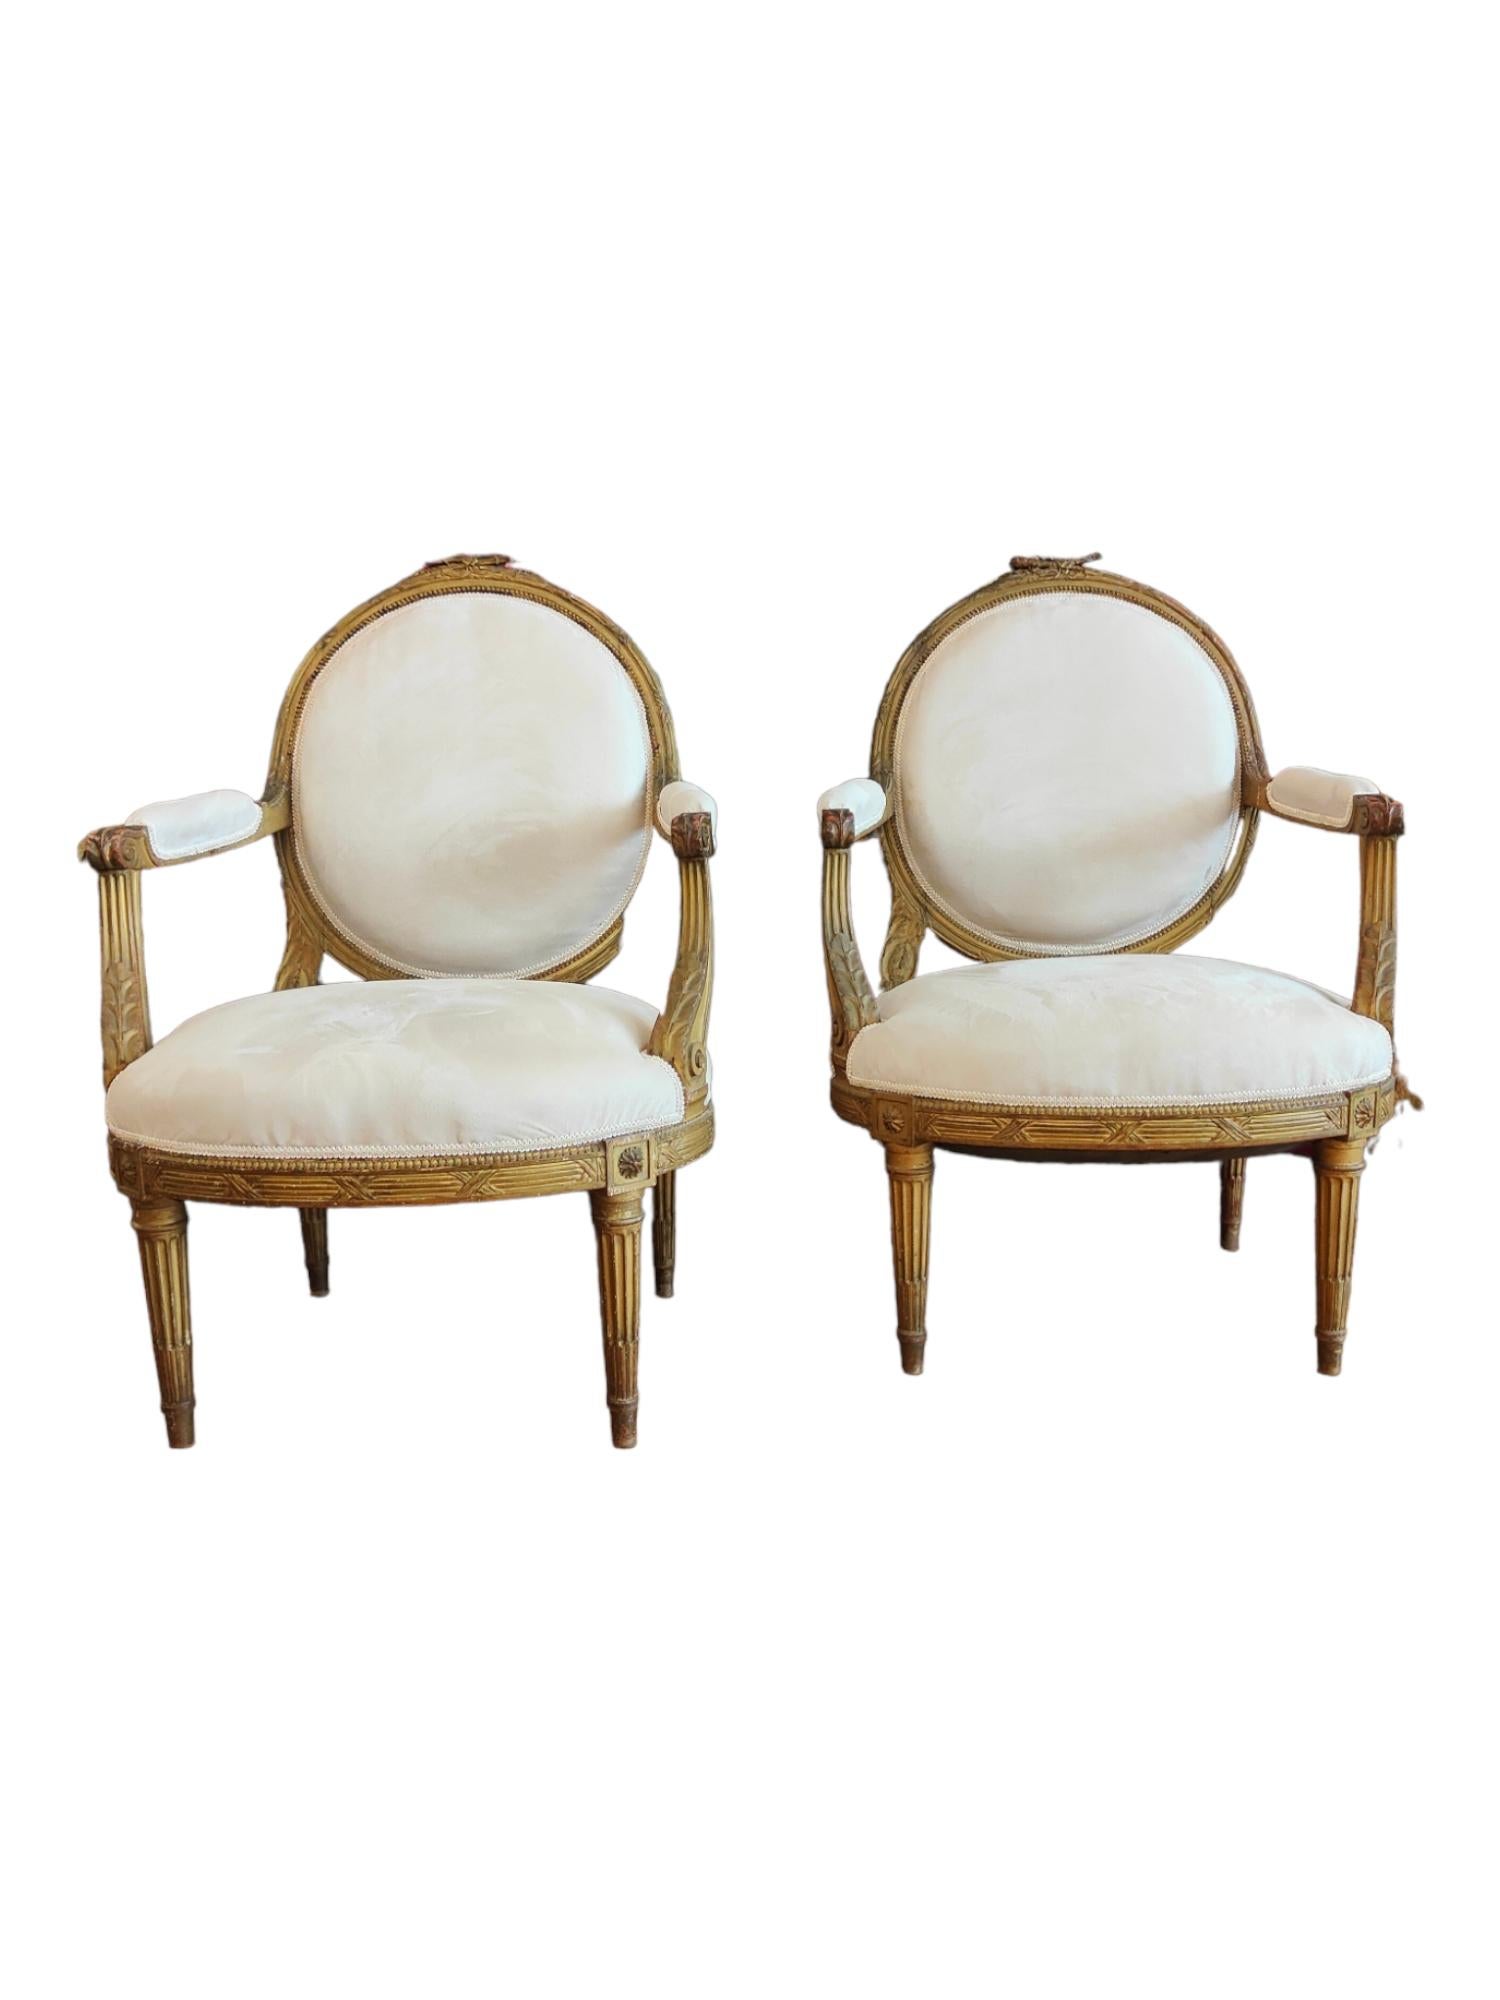 Fruitwood Pair Of French ArmChairs 18th Century For Sale